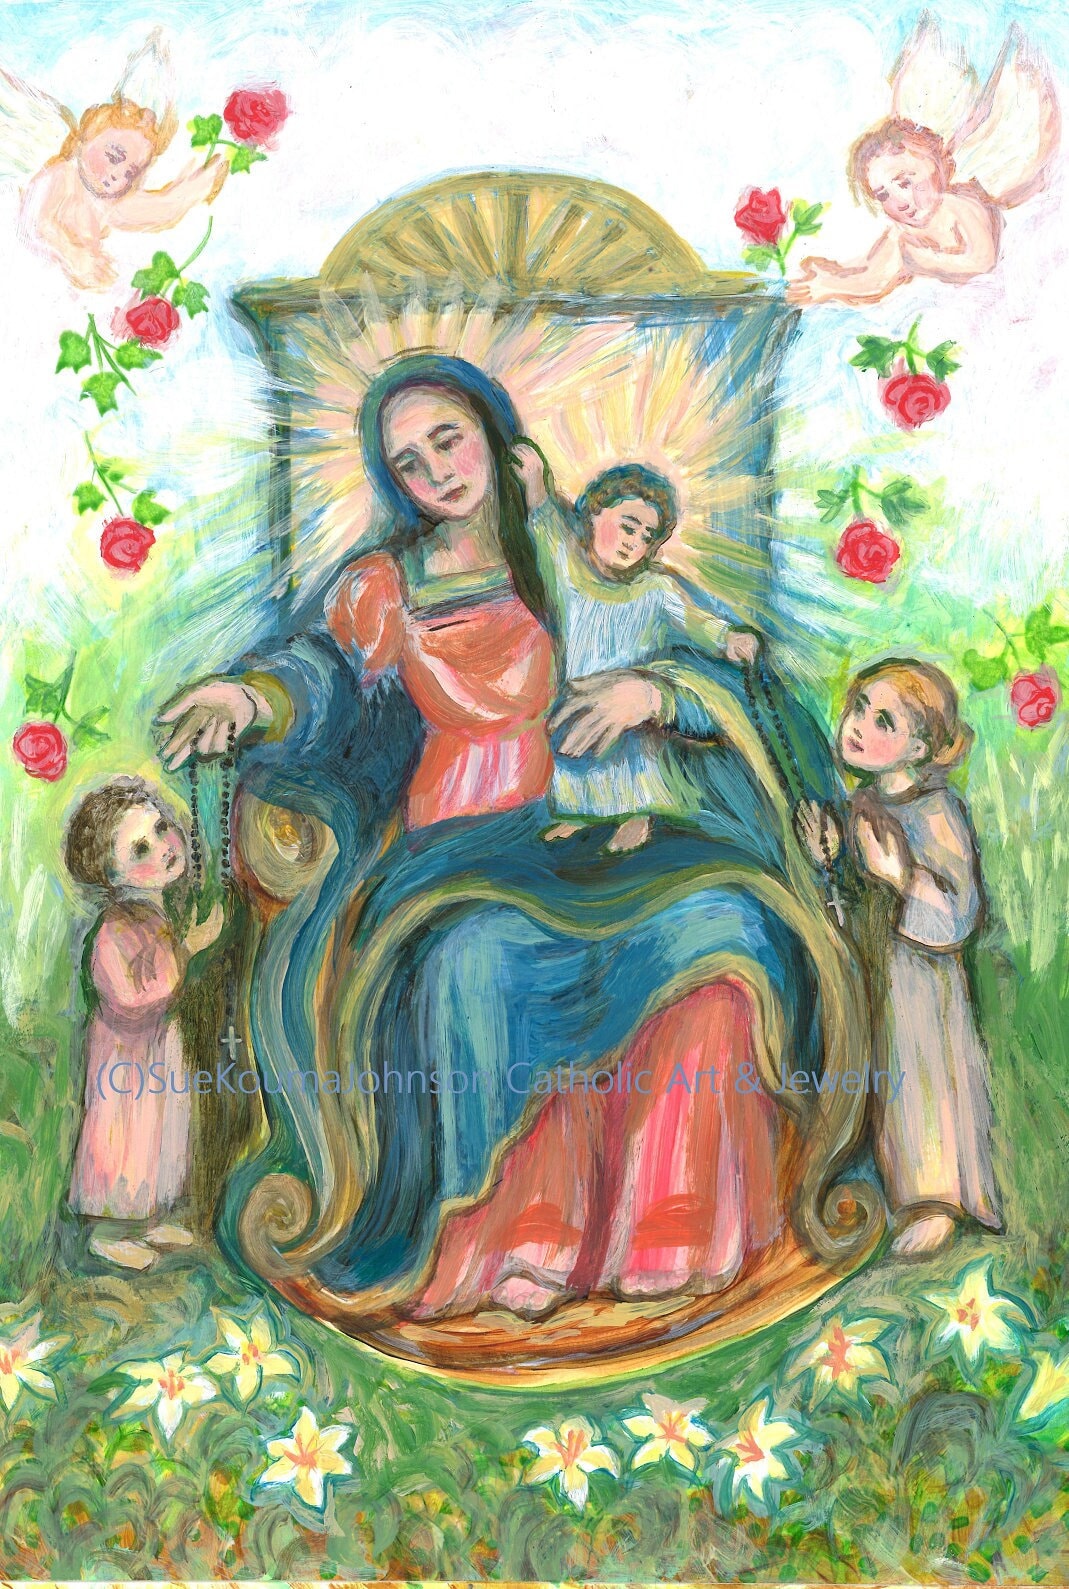 New! Our Lady of the Holy Rosary - Holy Cards – by Sue Kouma Johnson – pack of 10/100/1000